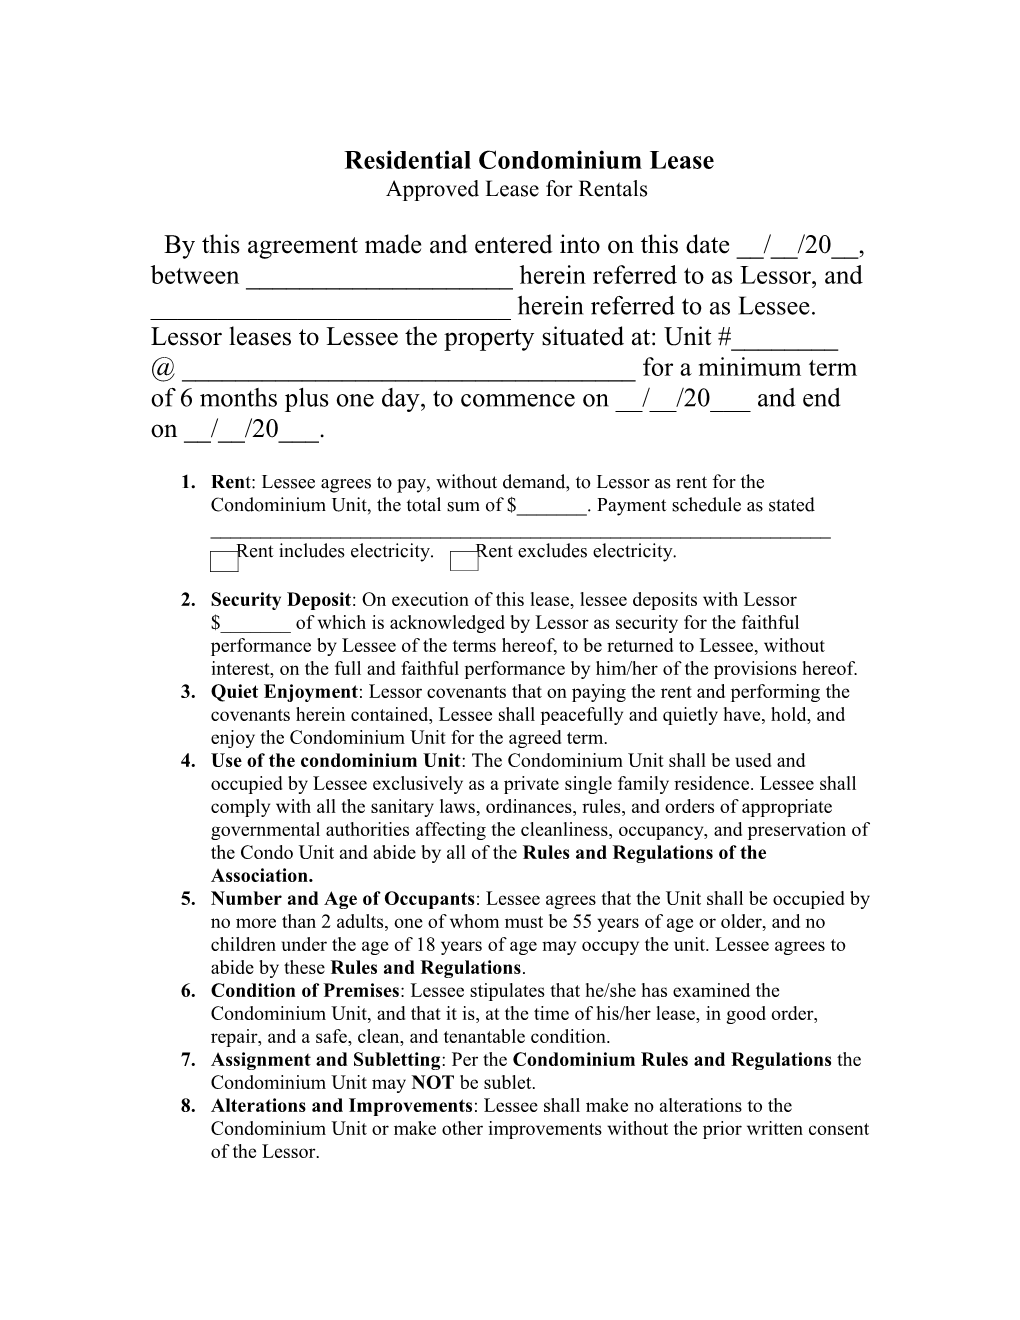 Approved Lease for Rentals